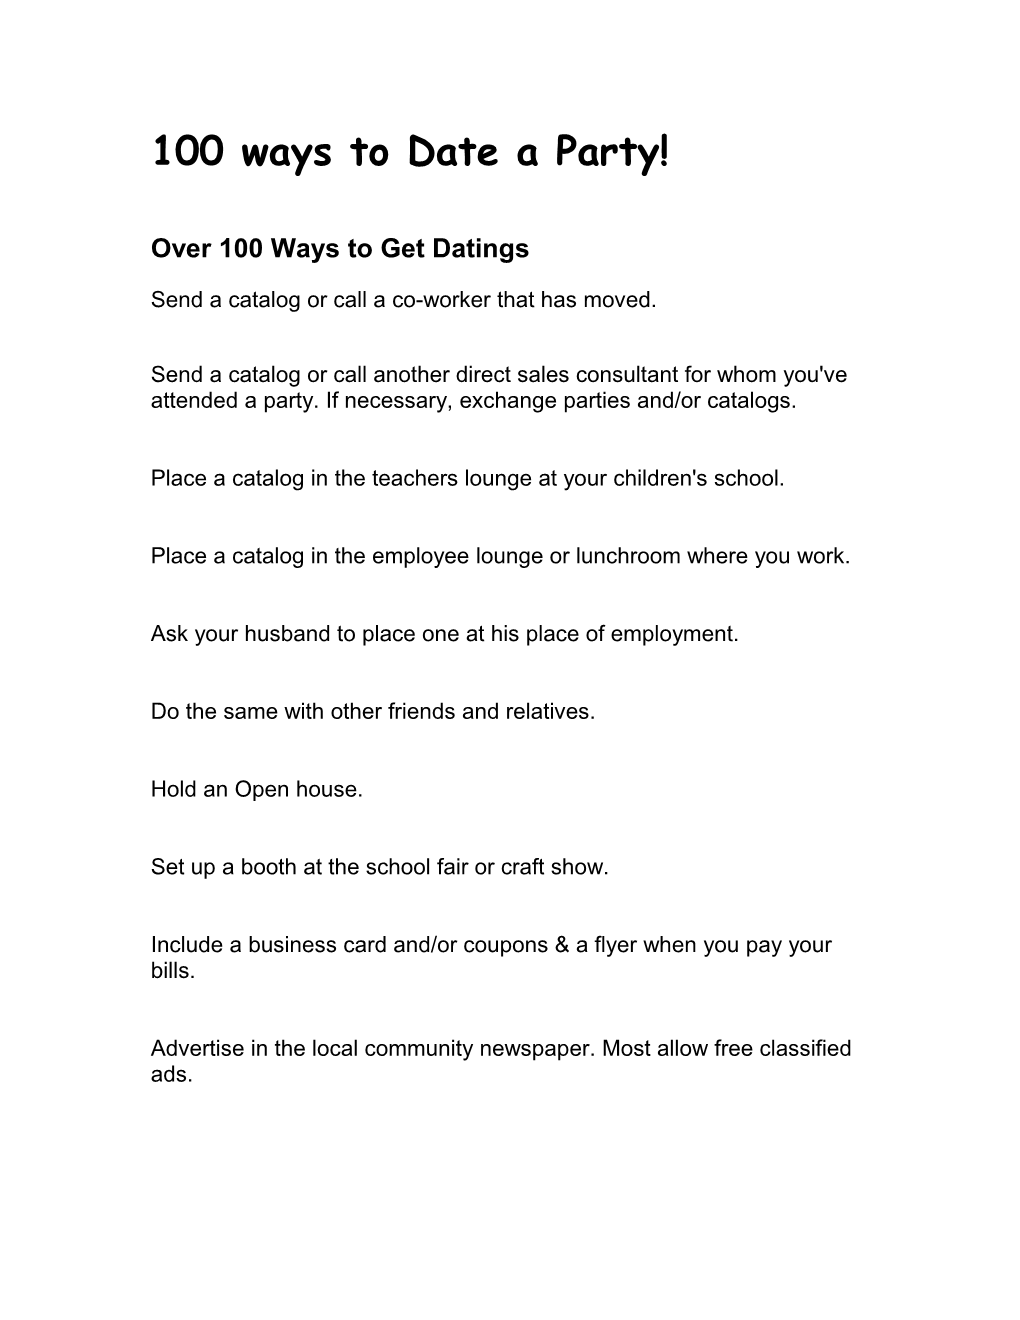 100 Ways to Date a Party